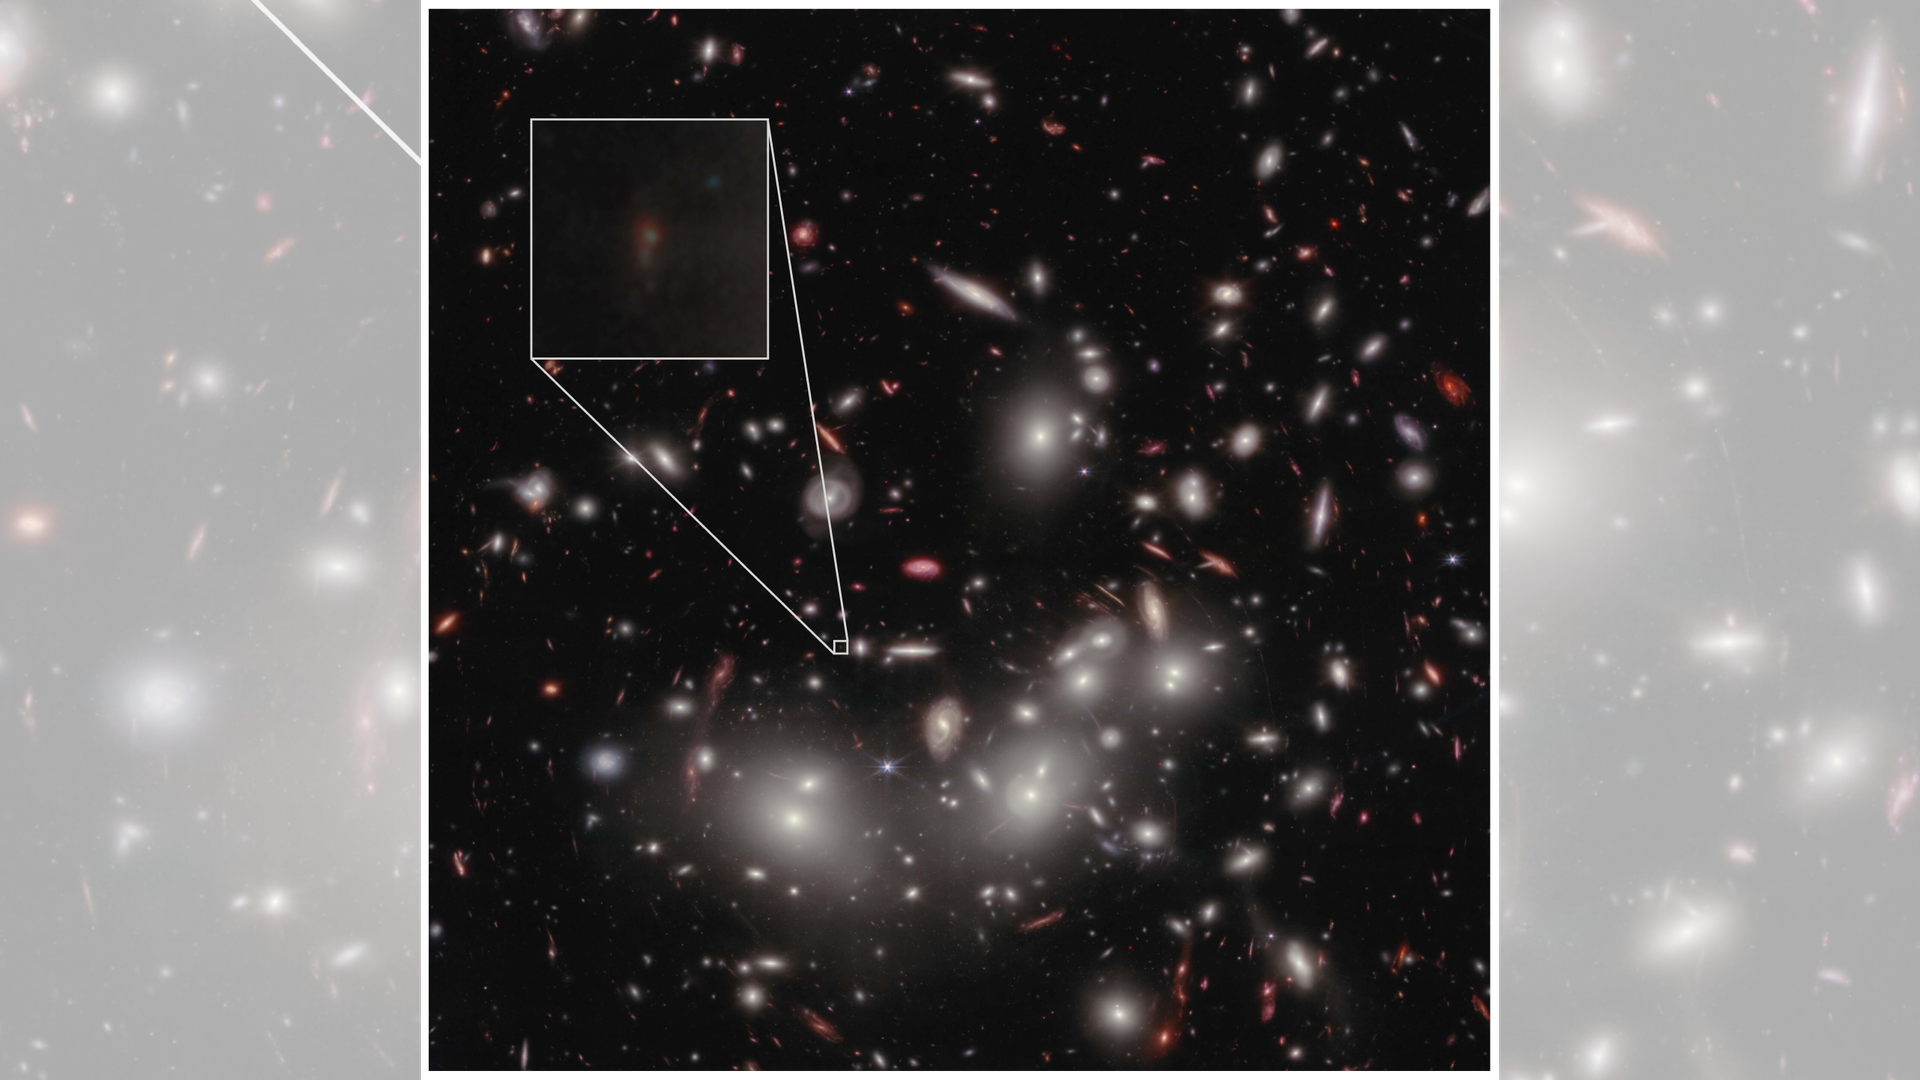 James Webb Space Telescope Finds One Of The Earliest Galaxies Ever Seen Live Science 